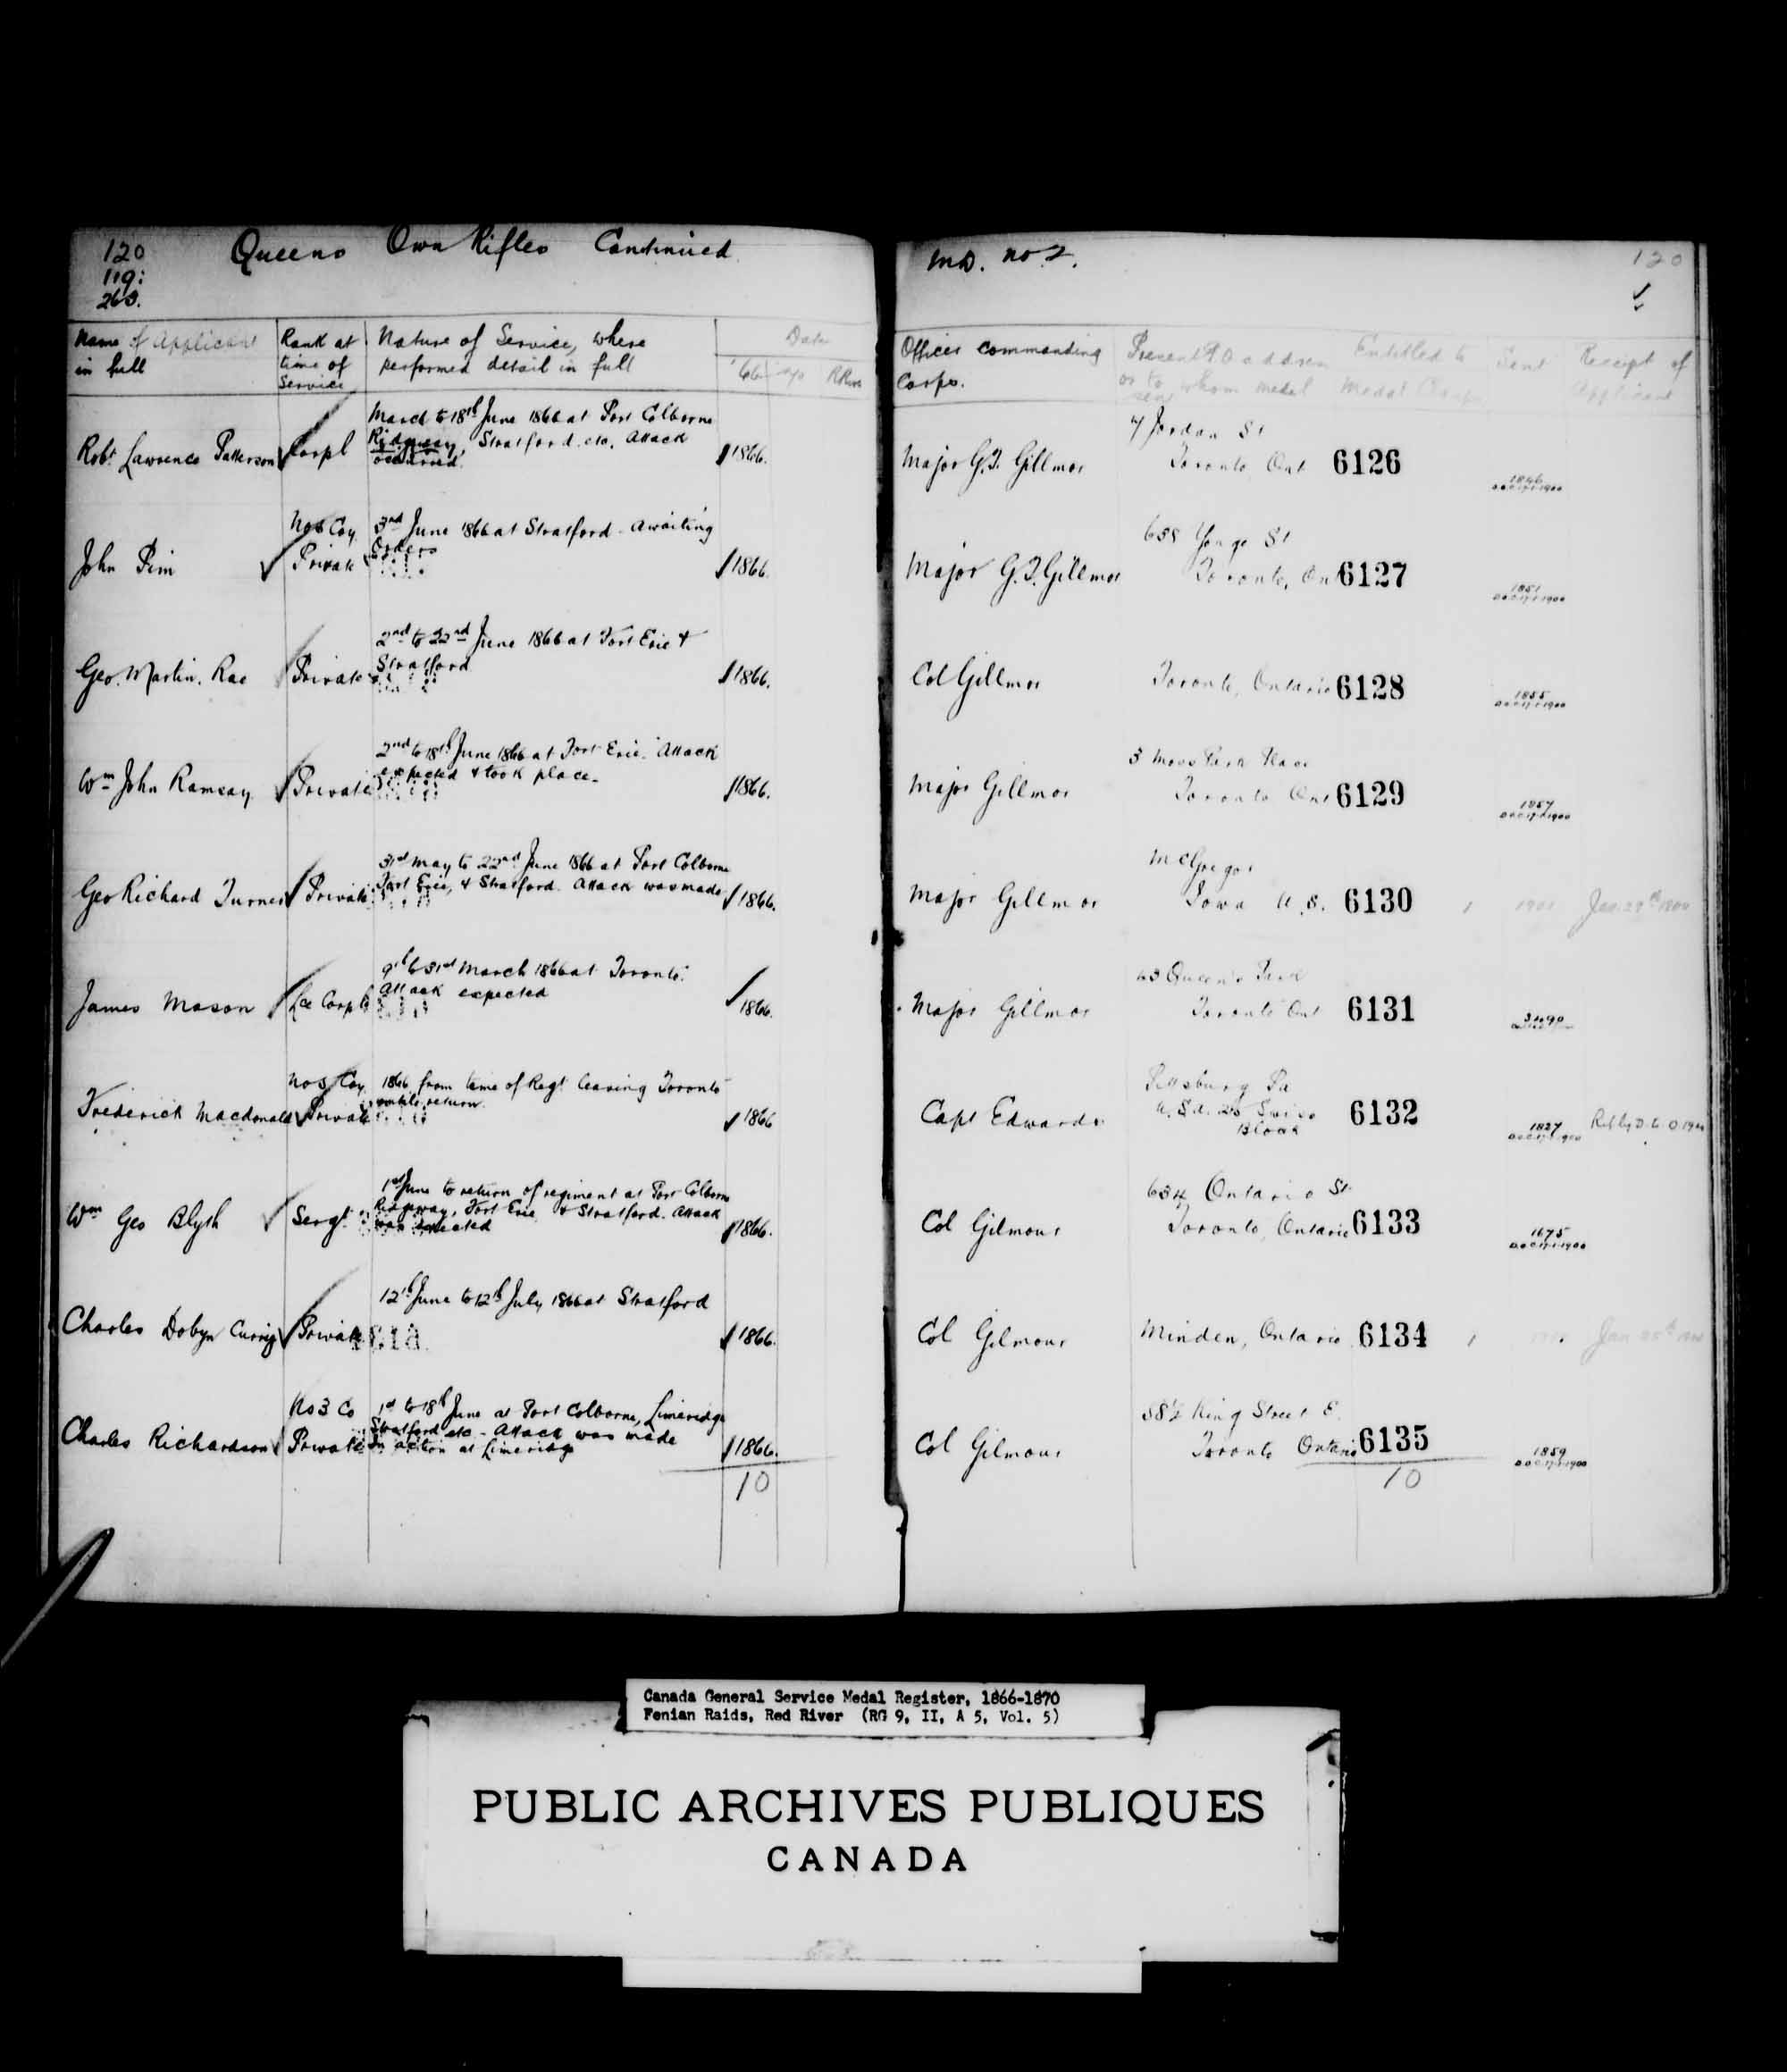 Digitized page of Medals, Honours and Awards for Image No.: e008682180